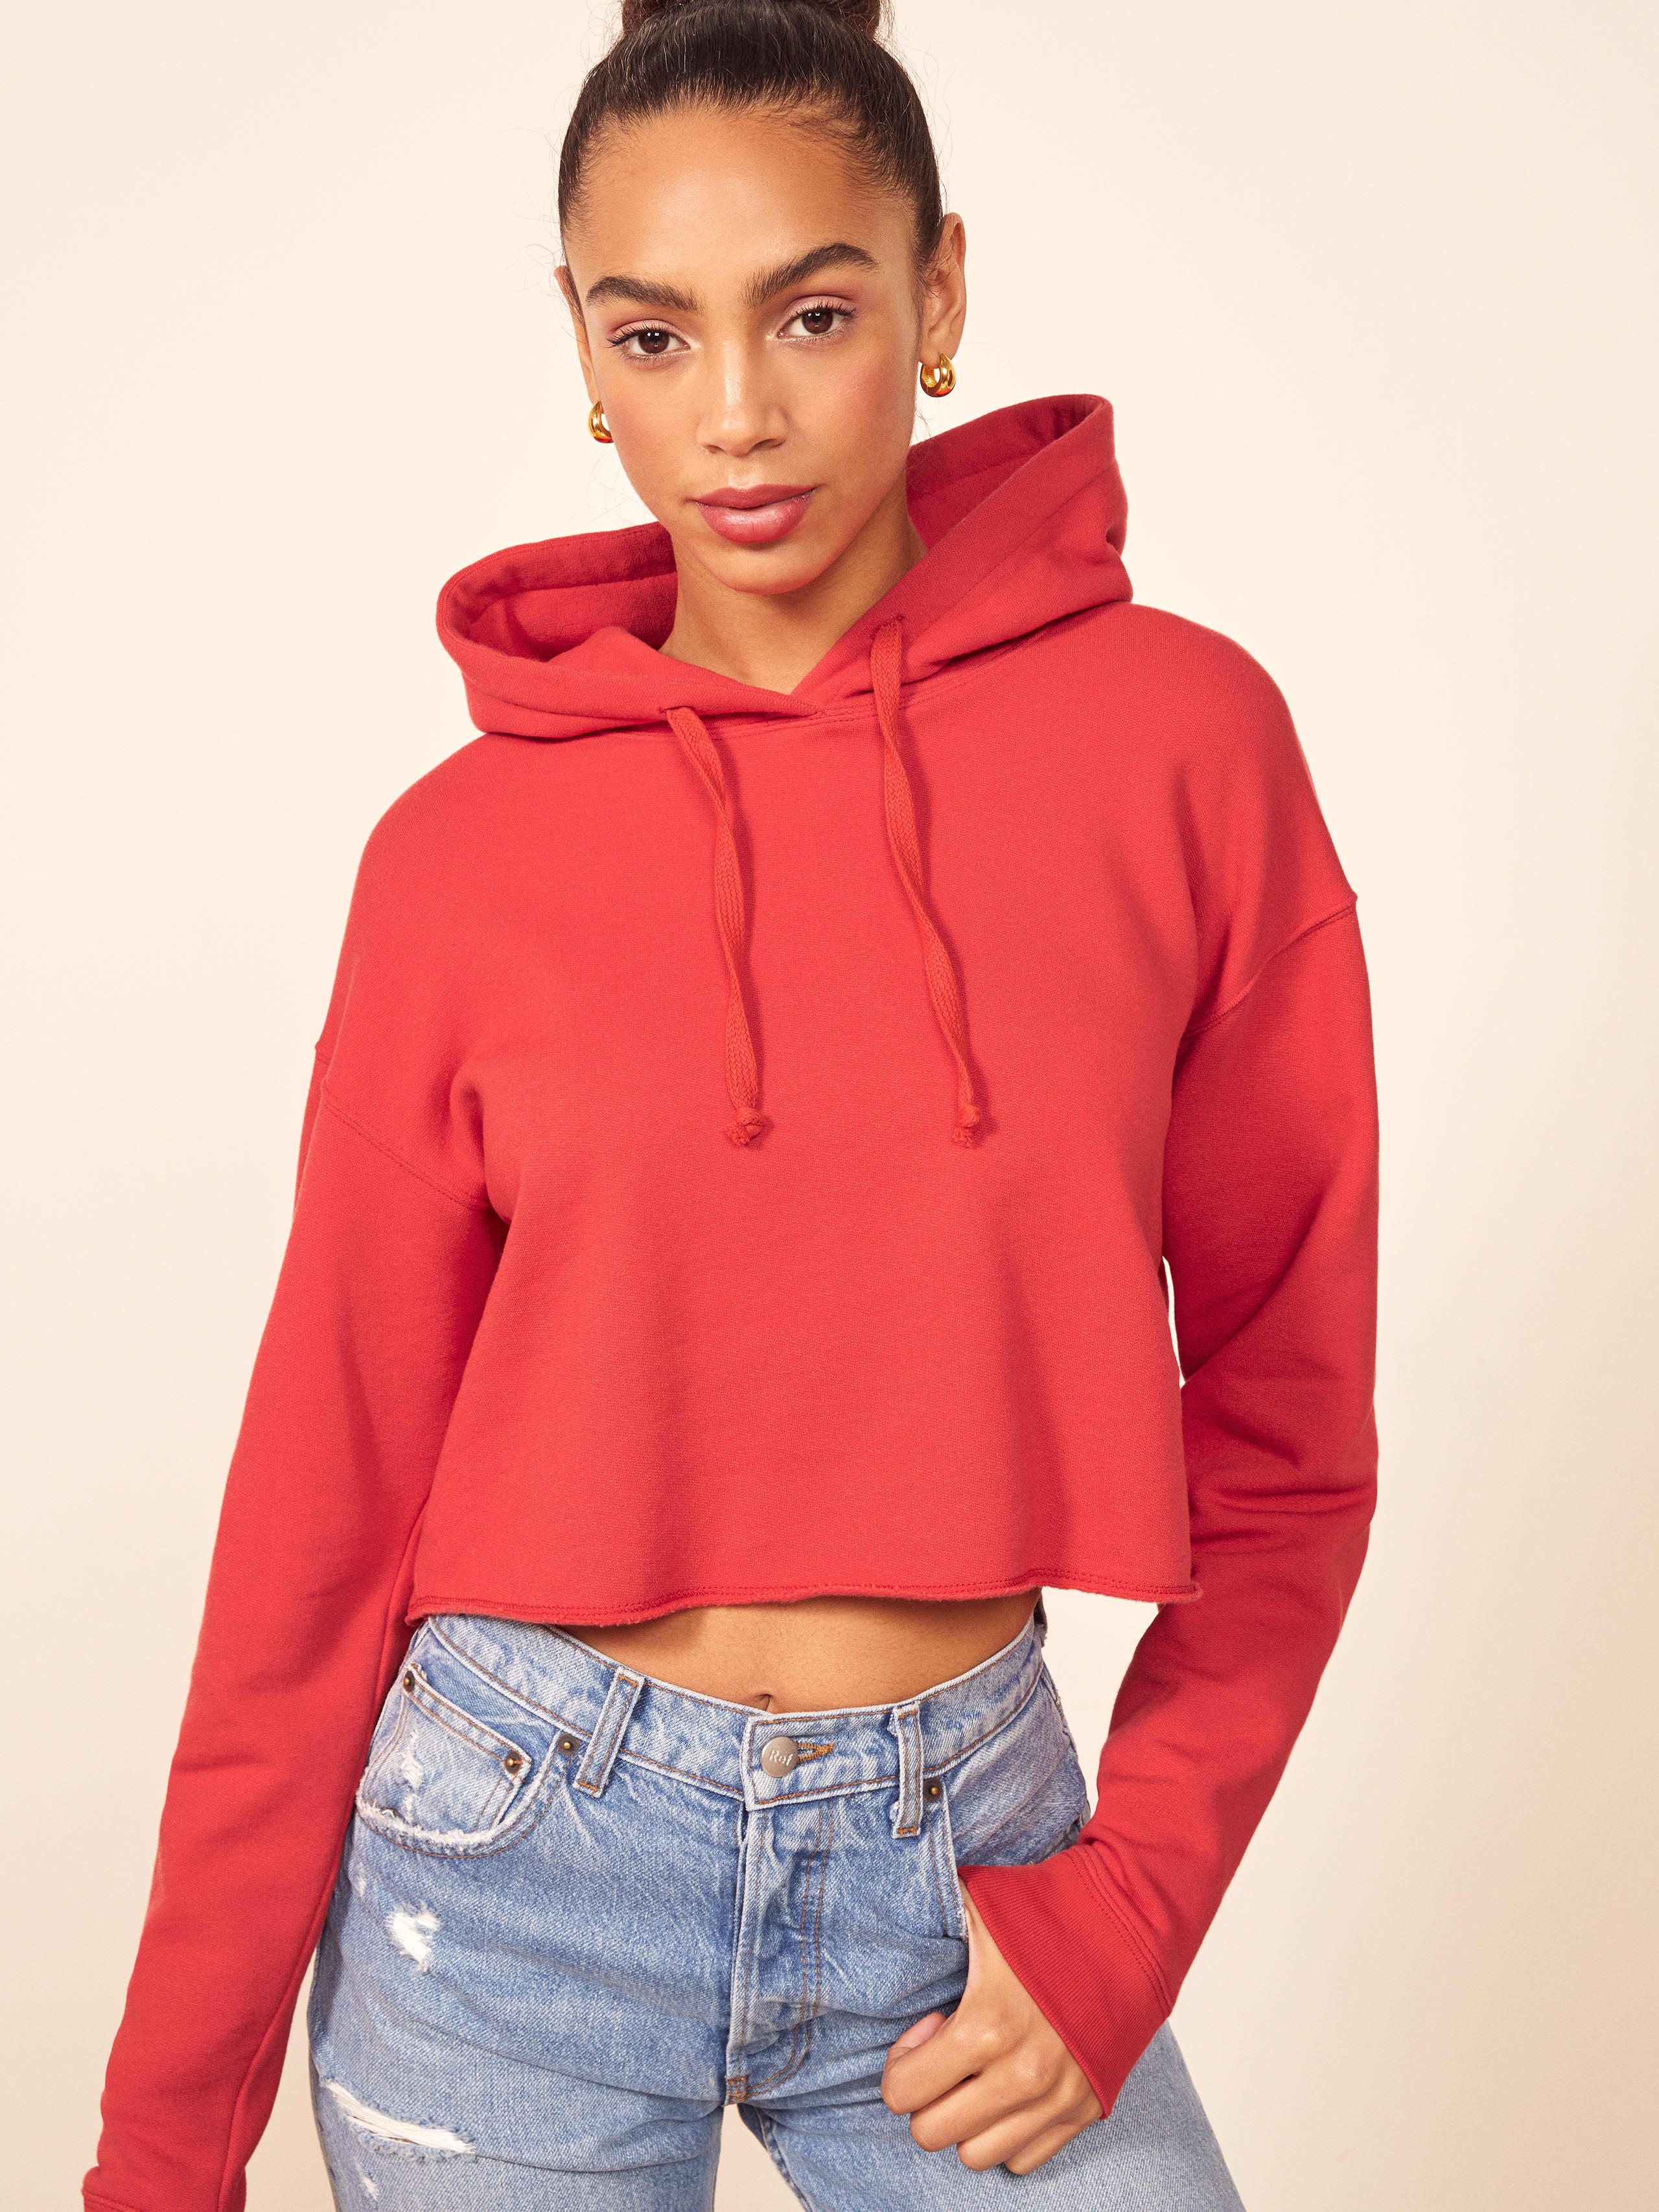 Women's Clothing - Sweaters and Sweatshirts - Reformation